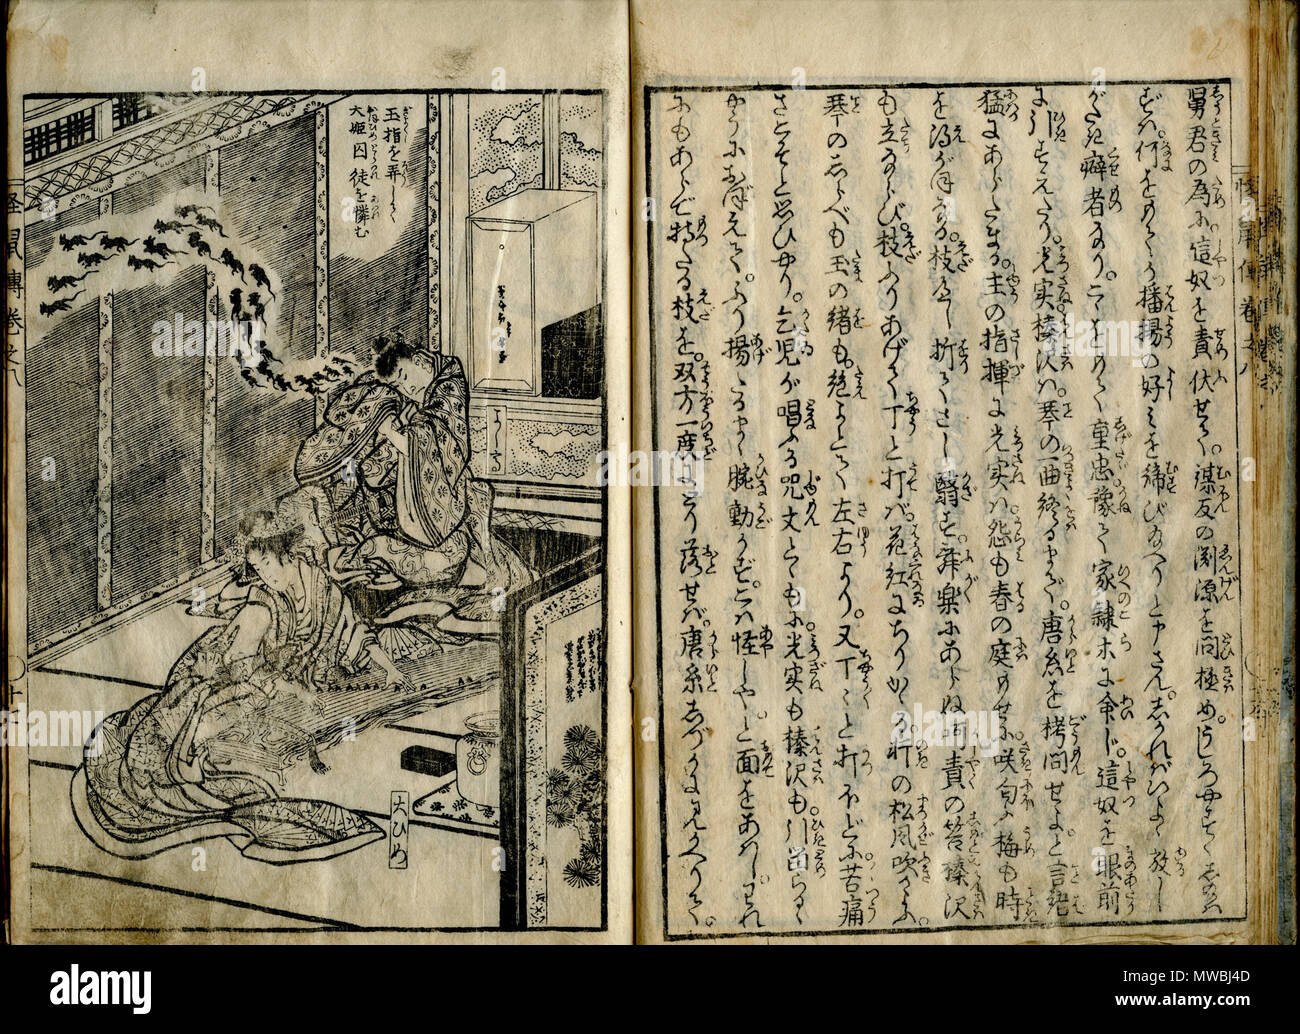 . English: E-hon series, title: Kuroneko Yamato - Black Cat (of(?)) Yamato (mouse infestation & neko/cat fantasy story), author pending, illustrated by Katsushika Hokusai, published during the Edo period, circa 1808(?). Scans of 3 volumes (03, 08, 09) of a multi-volume (10 vols in total?) series. Test scan of 2 facing pages; at left, 1-page illustration with captions, at right (partial, japanese) text of the story. Image depicts a stream of black mice running along the wall (or flying?) behind a samurai in casual robes with sword, seated appears to be curled in on himself, looking unhappy. In  Stock Photo